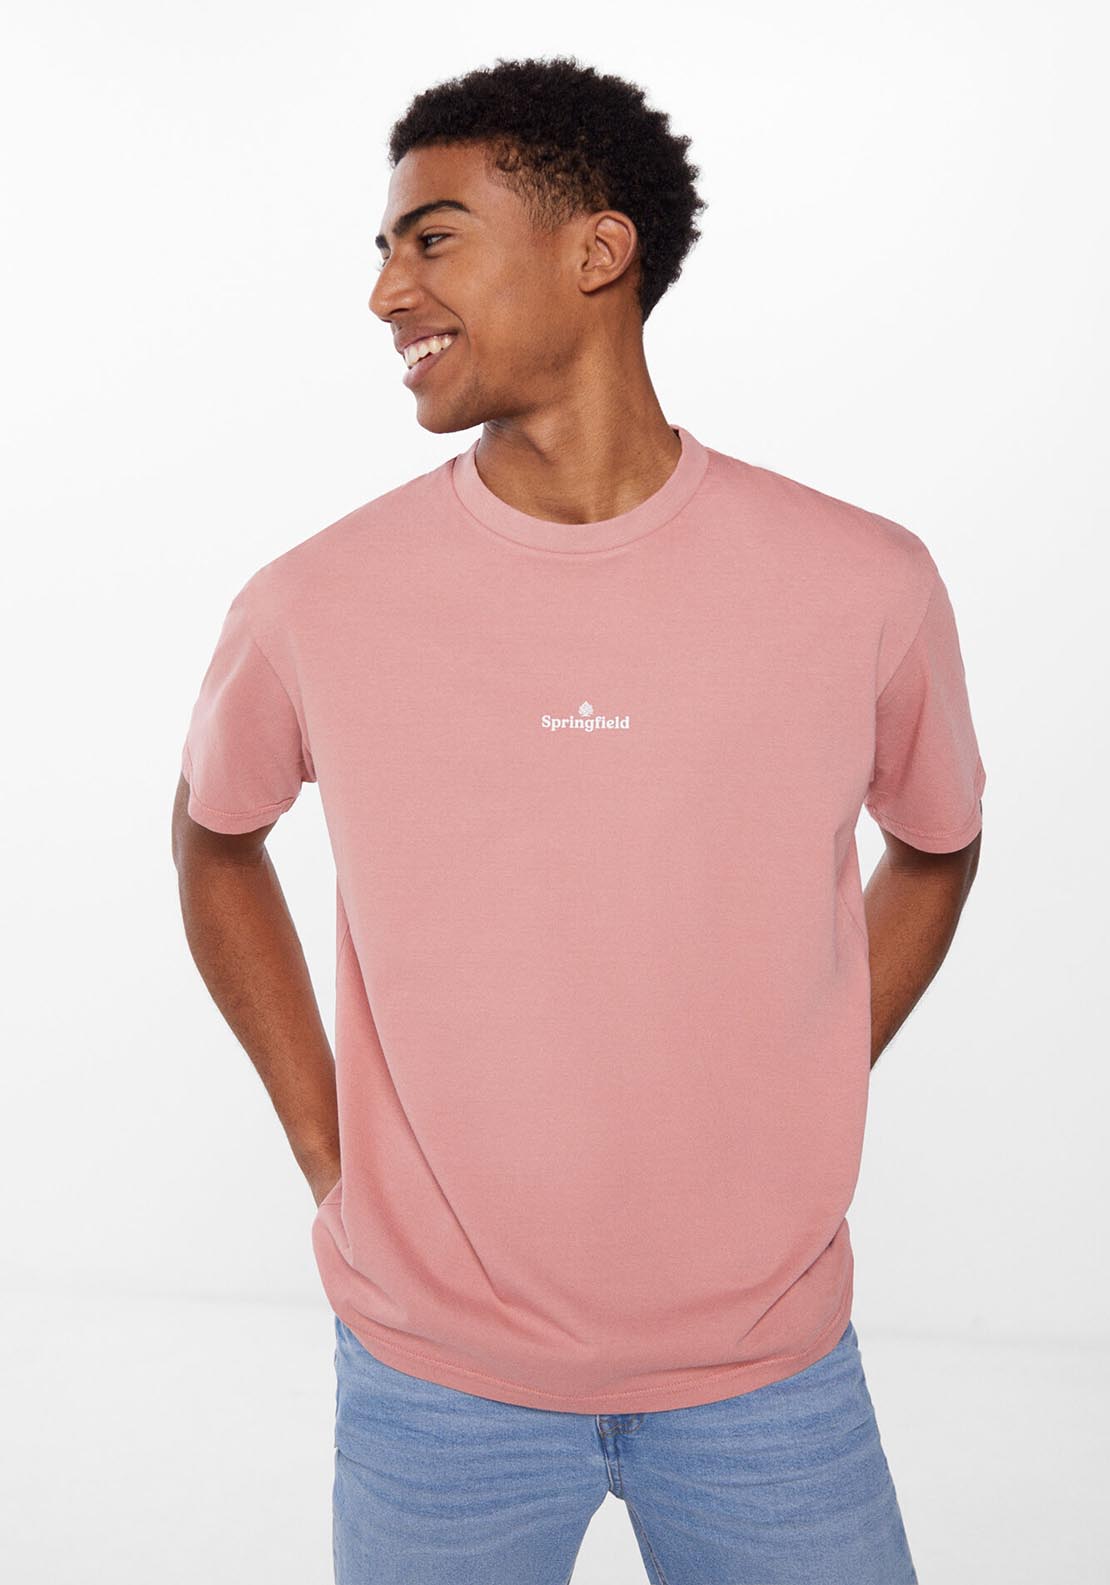 Springfield Washed T-shirt with logo - Pink 1 Shaws Department Stores